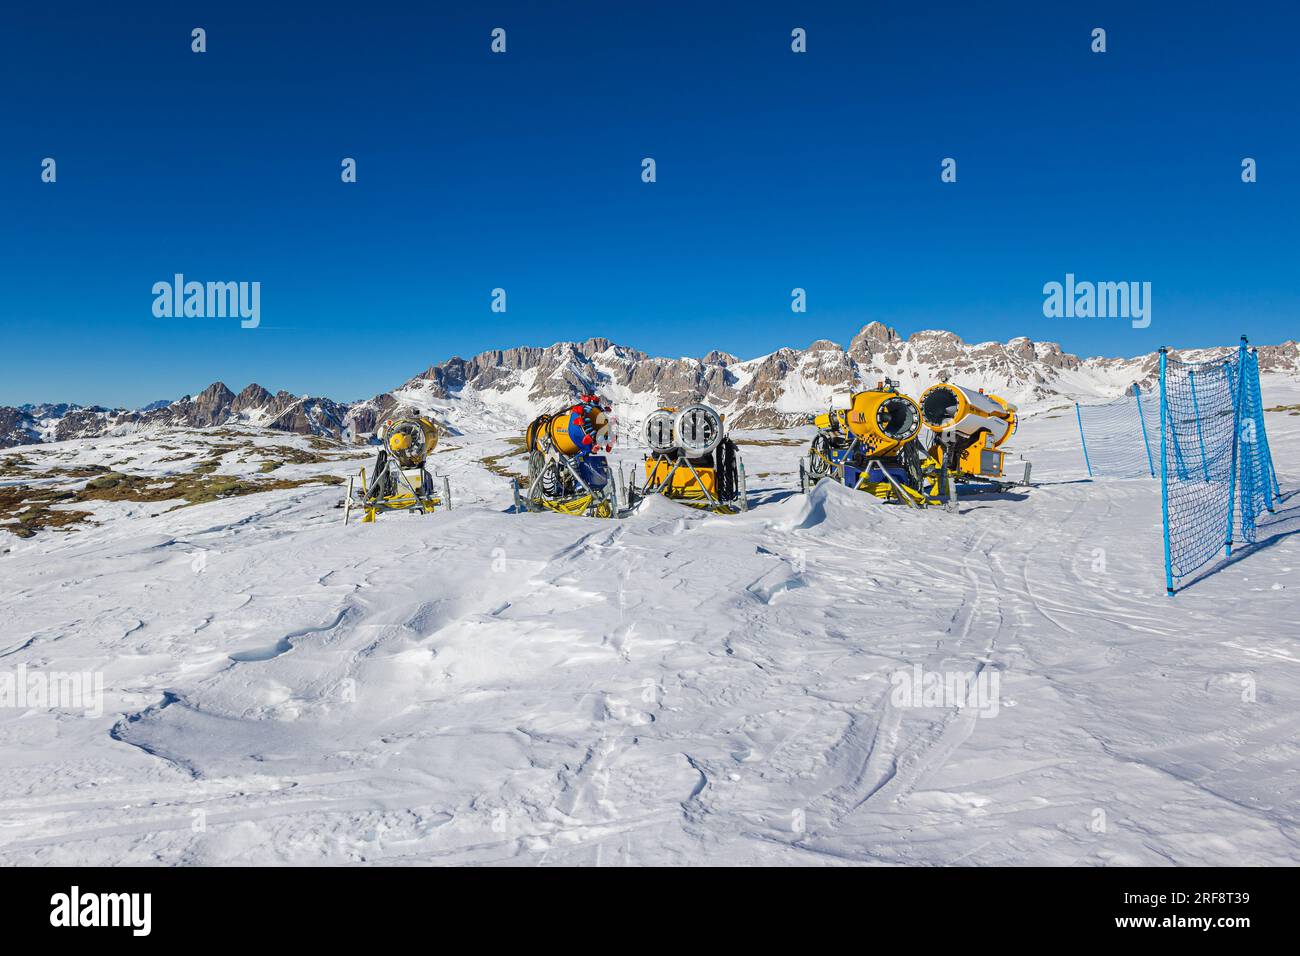 https://c8.alamy.com/comp/2RF8T39/falcade-italy-february-15-2023-the-future-of-winter-sports-snow-cannon-or-snow-gun-in-the-dolomites-mountains-climate-change-is-reducing-the-am-2RF8T39.jpg